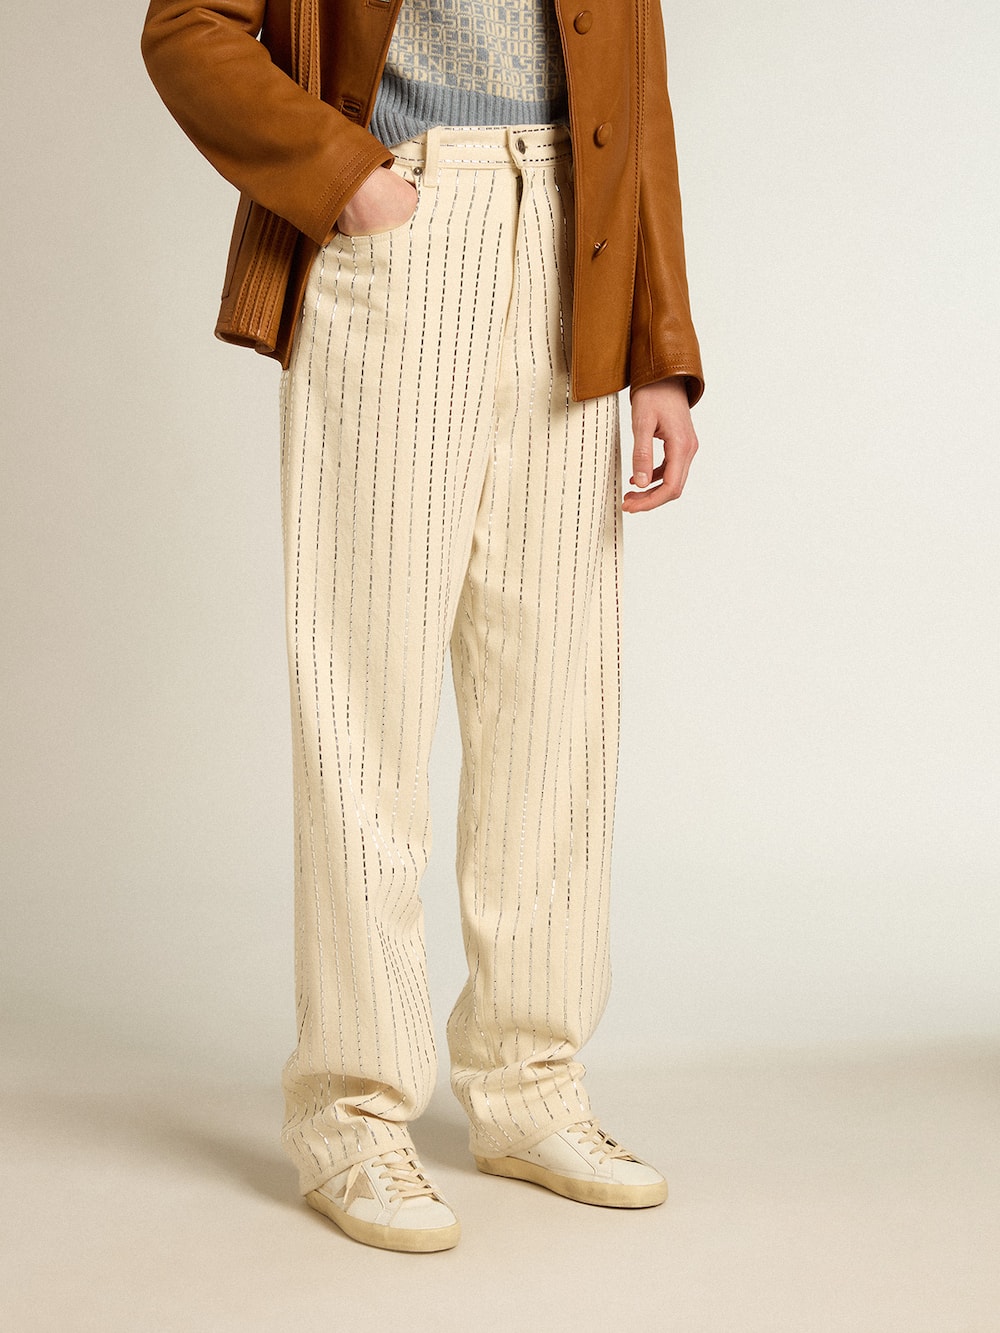 Golden Goose - White pants with baguette-shaped studs in 